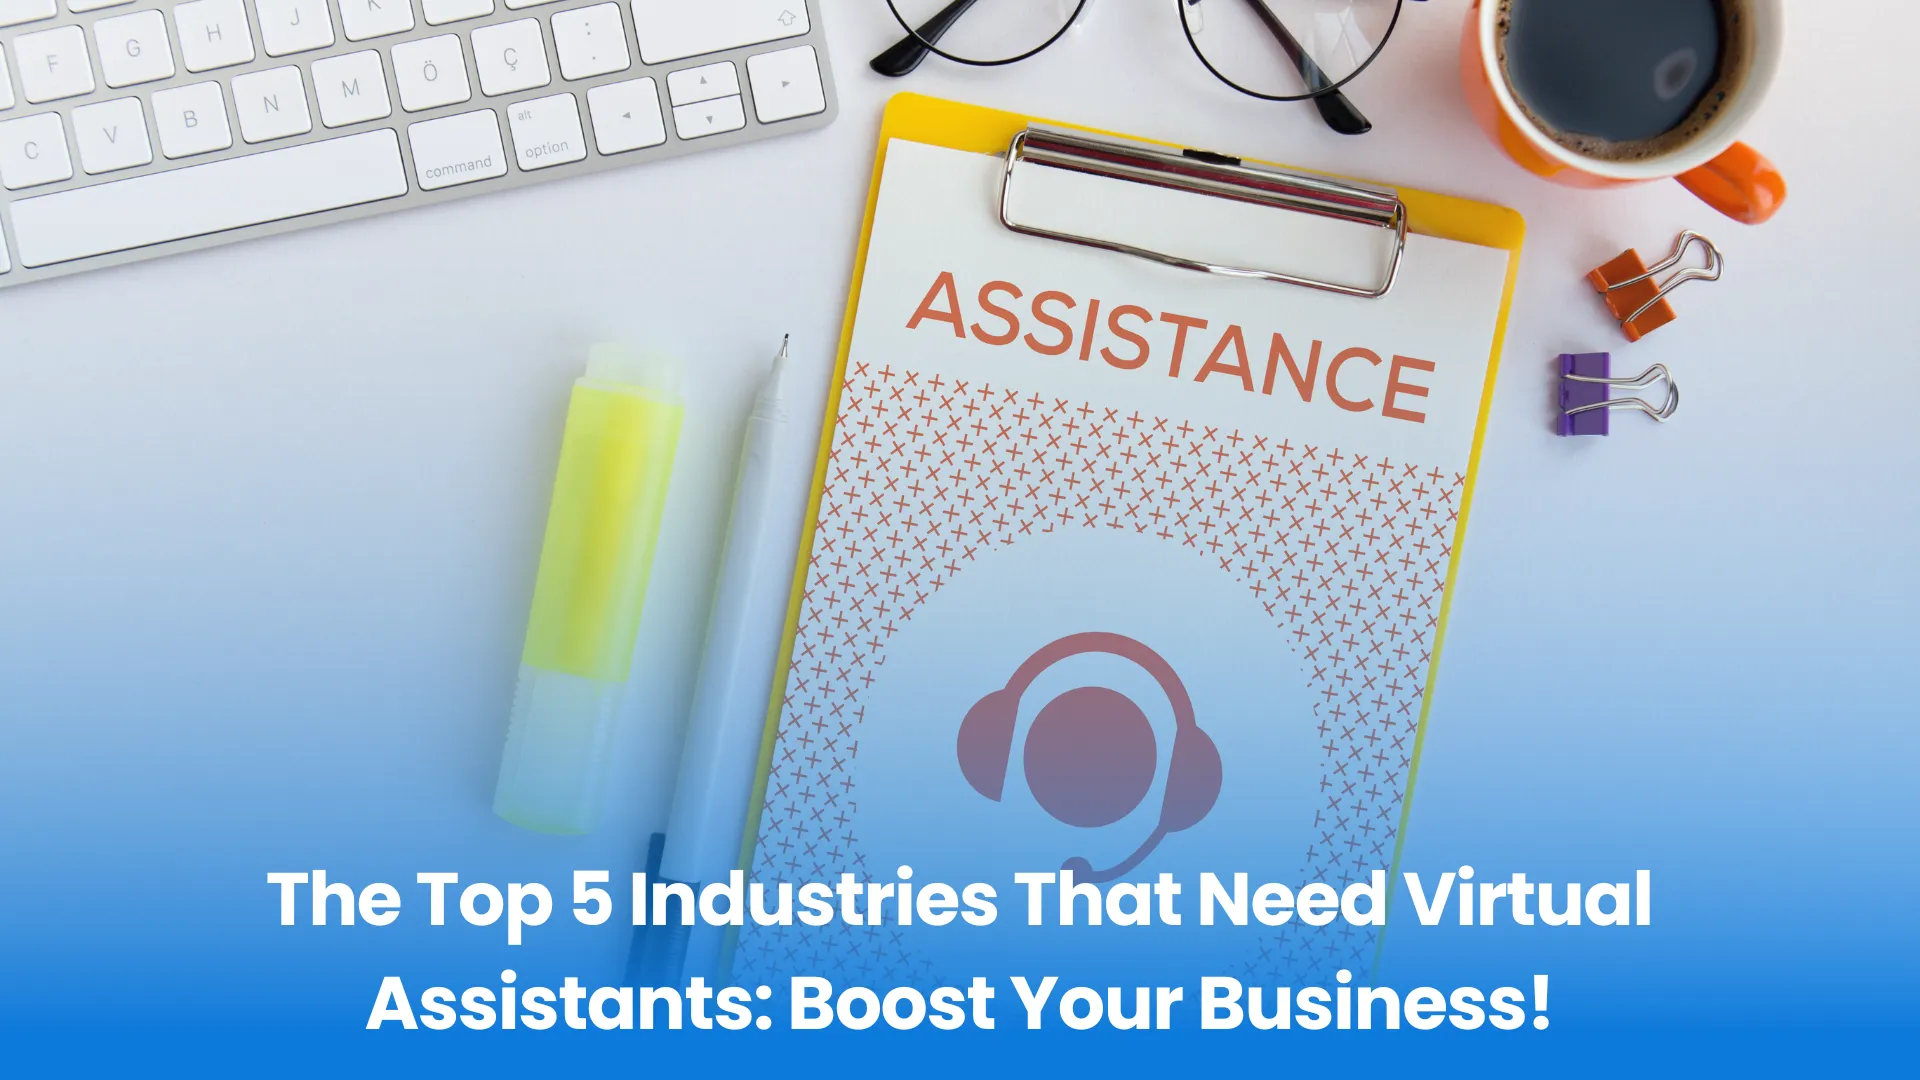 The Top 5 Industries That Need Virtual Assistants: Boost Your Business!